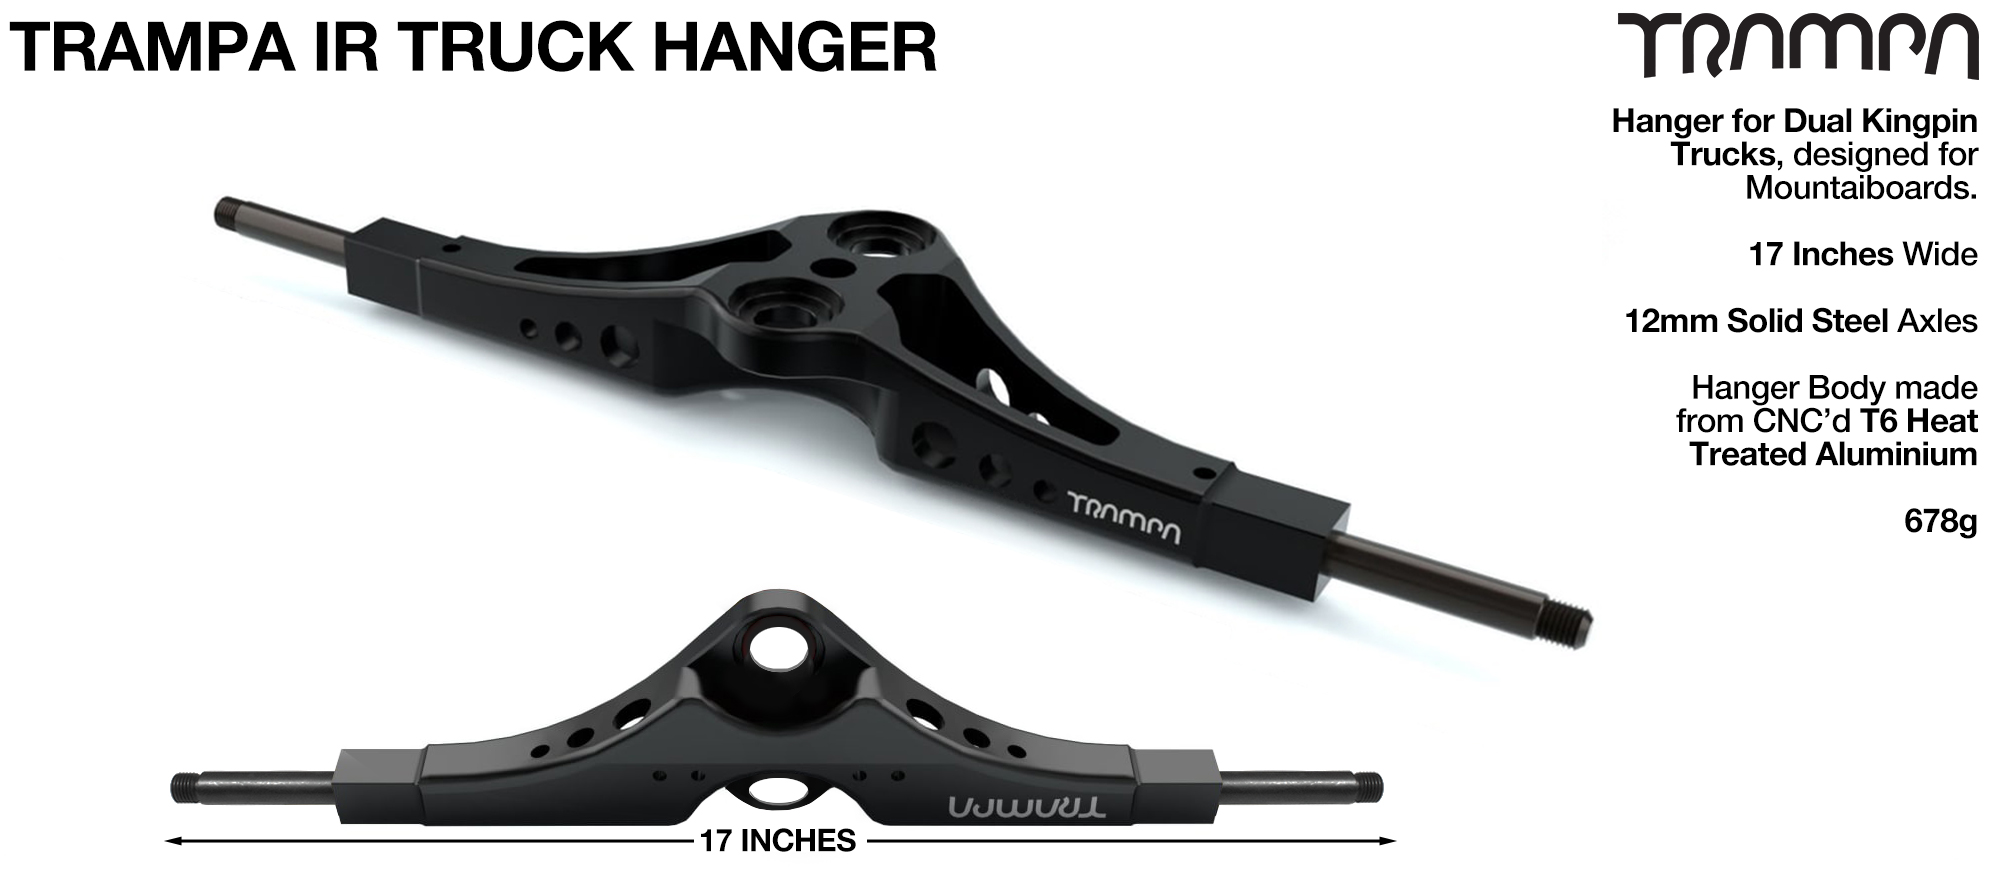 TRAMPA-IR HANGERS use 12mm SCM415 Chromoly Steel Axles & measure 17 inches wide. This item comes with the Axles installed & the Spacers & Axle nuts fitted